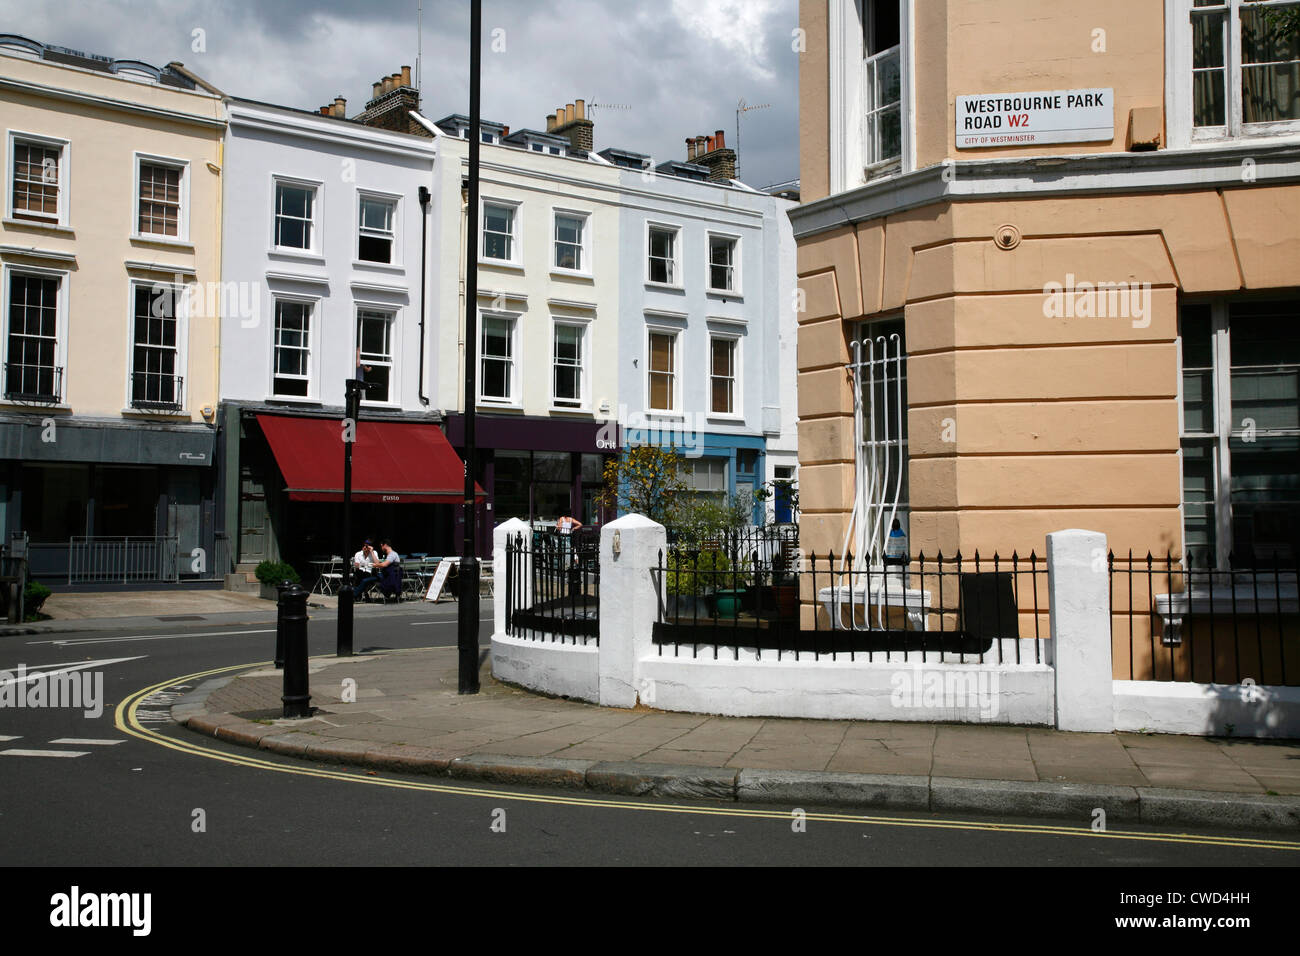 Looking across Westbourne Park Road and Westbourne Park Villas to Gusto restaurant, Notting Hill, London, UK Stock Photo